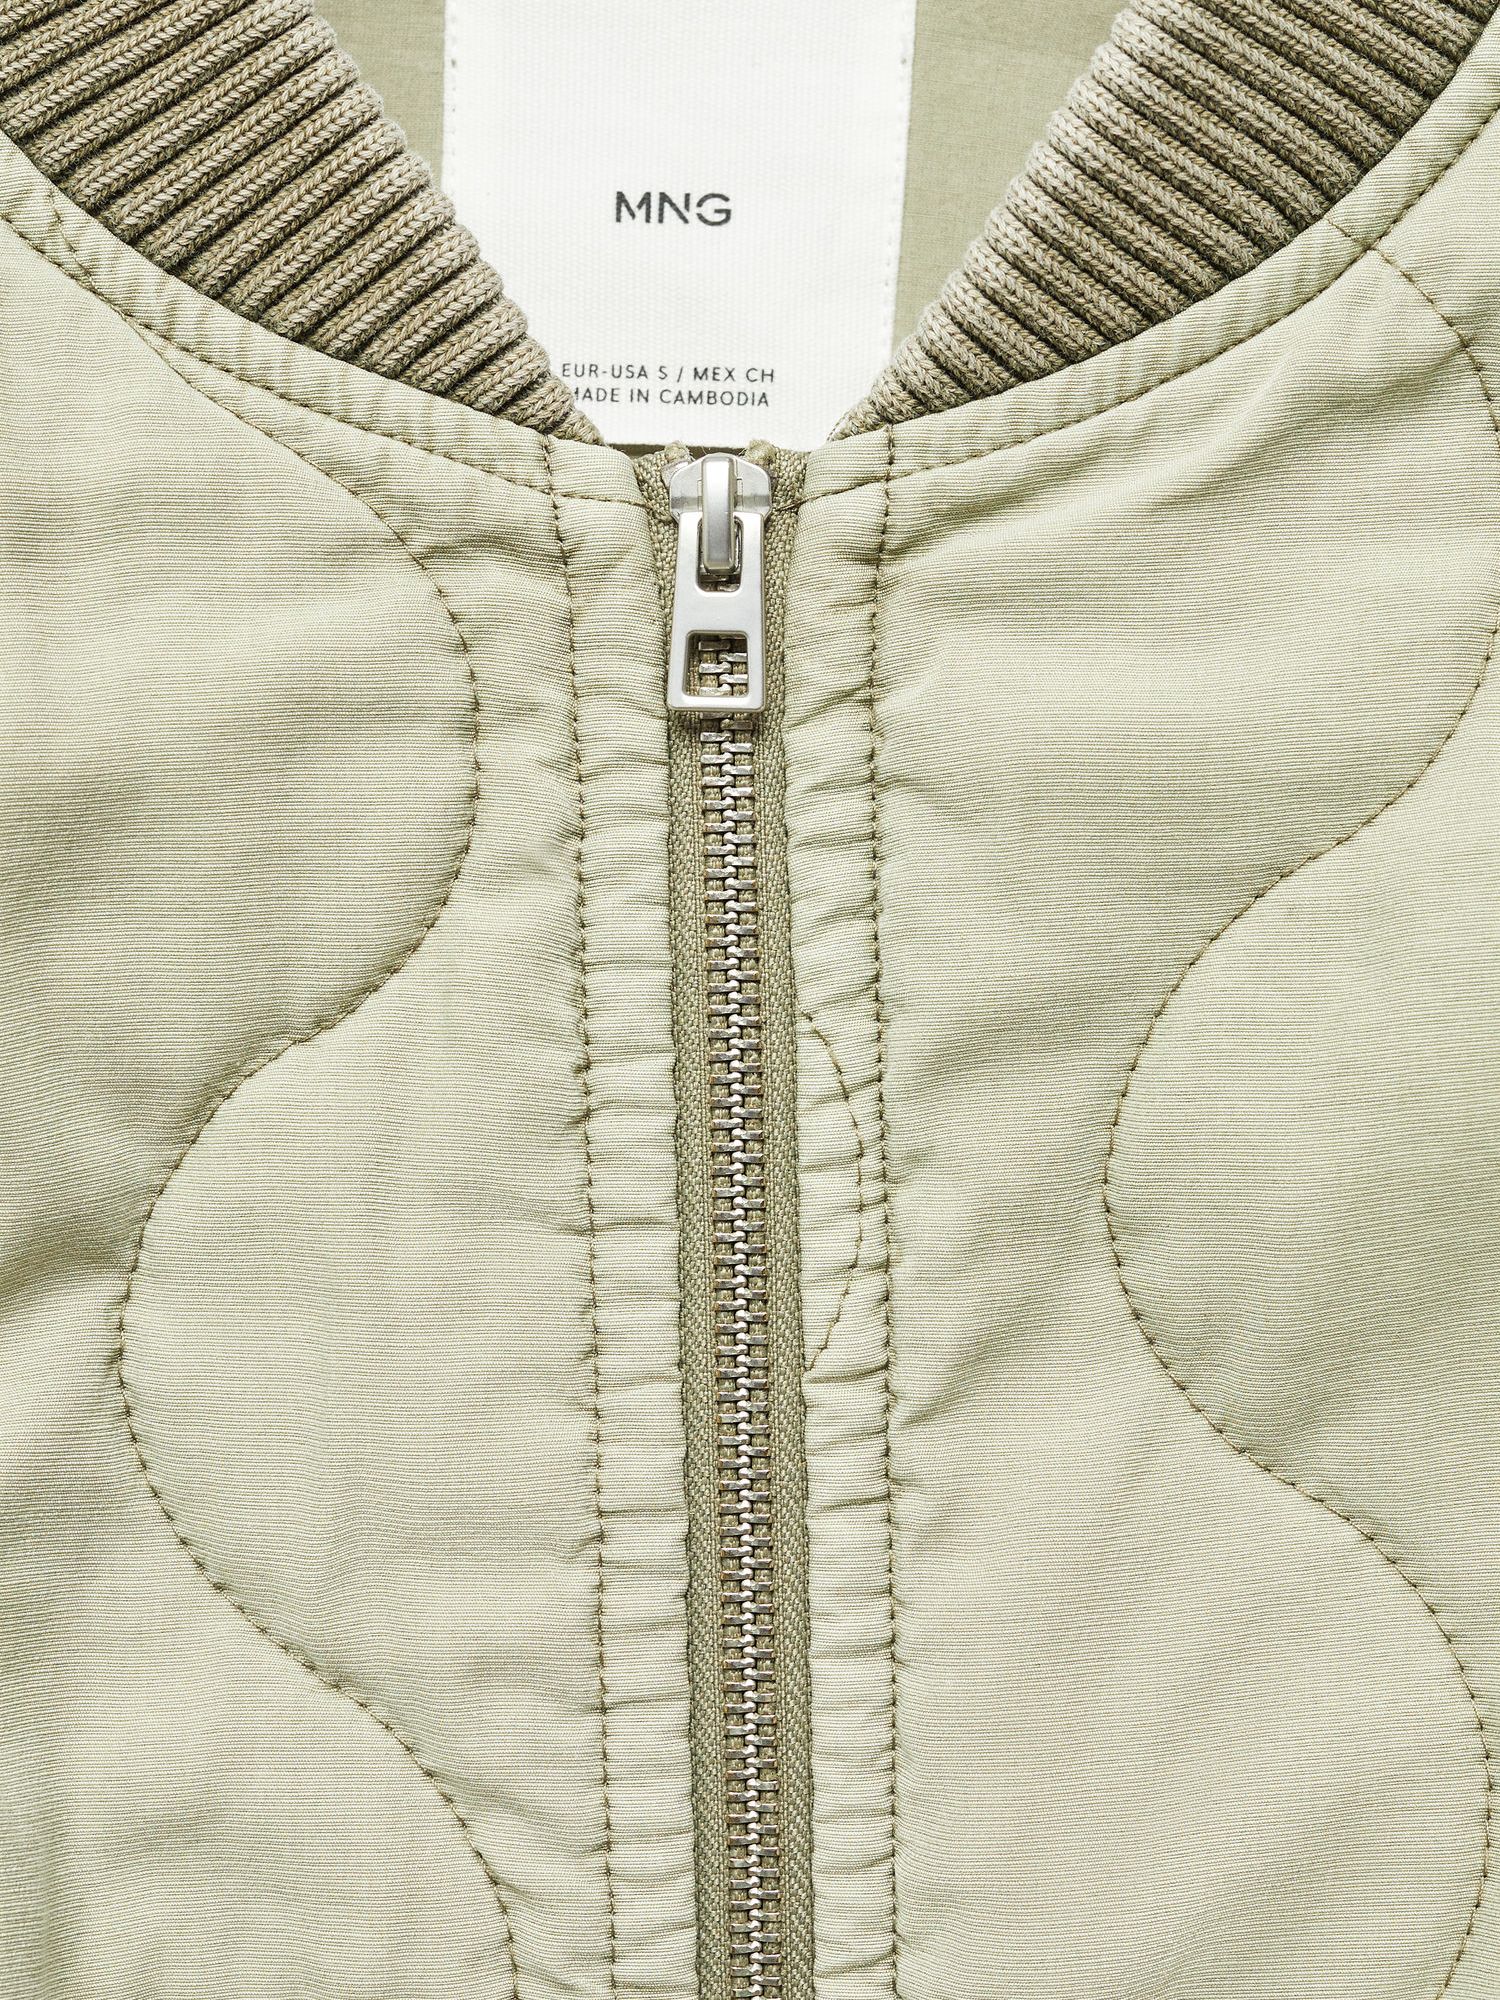 Buy Mango Hawai Quilted Bomber Jacket Online at johnlewis.com